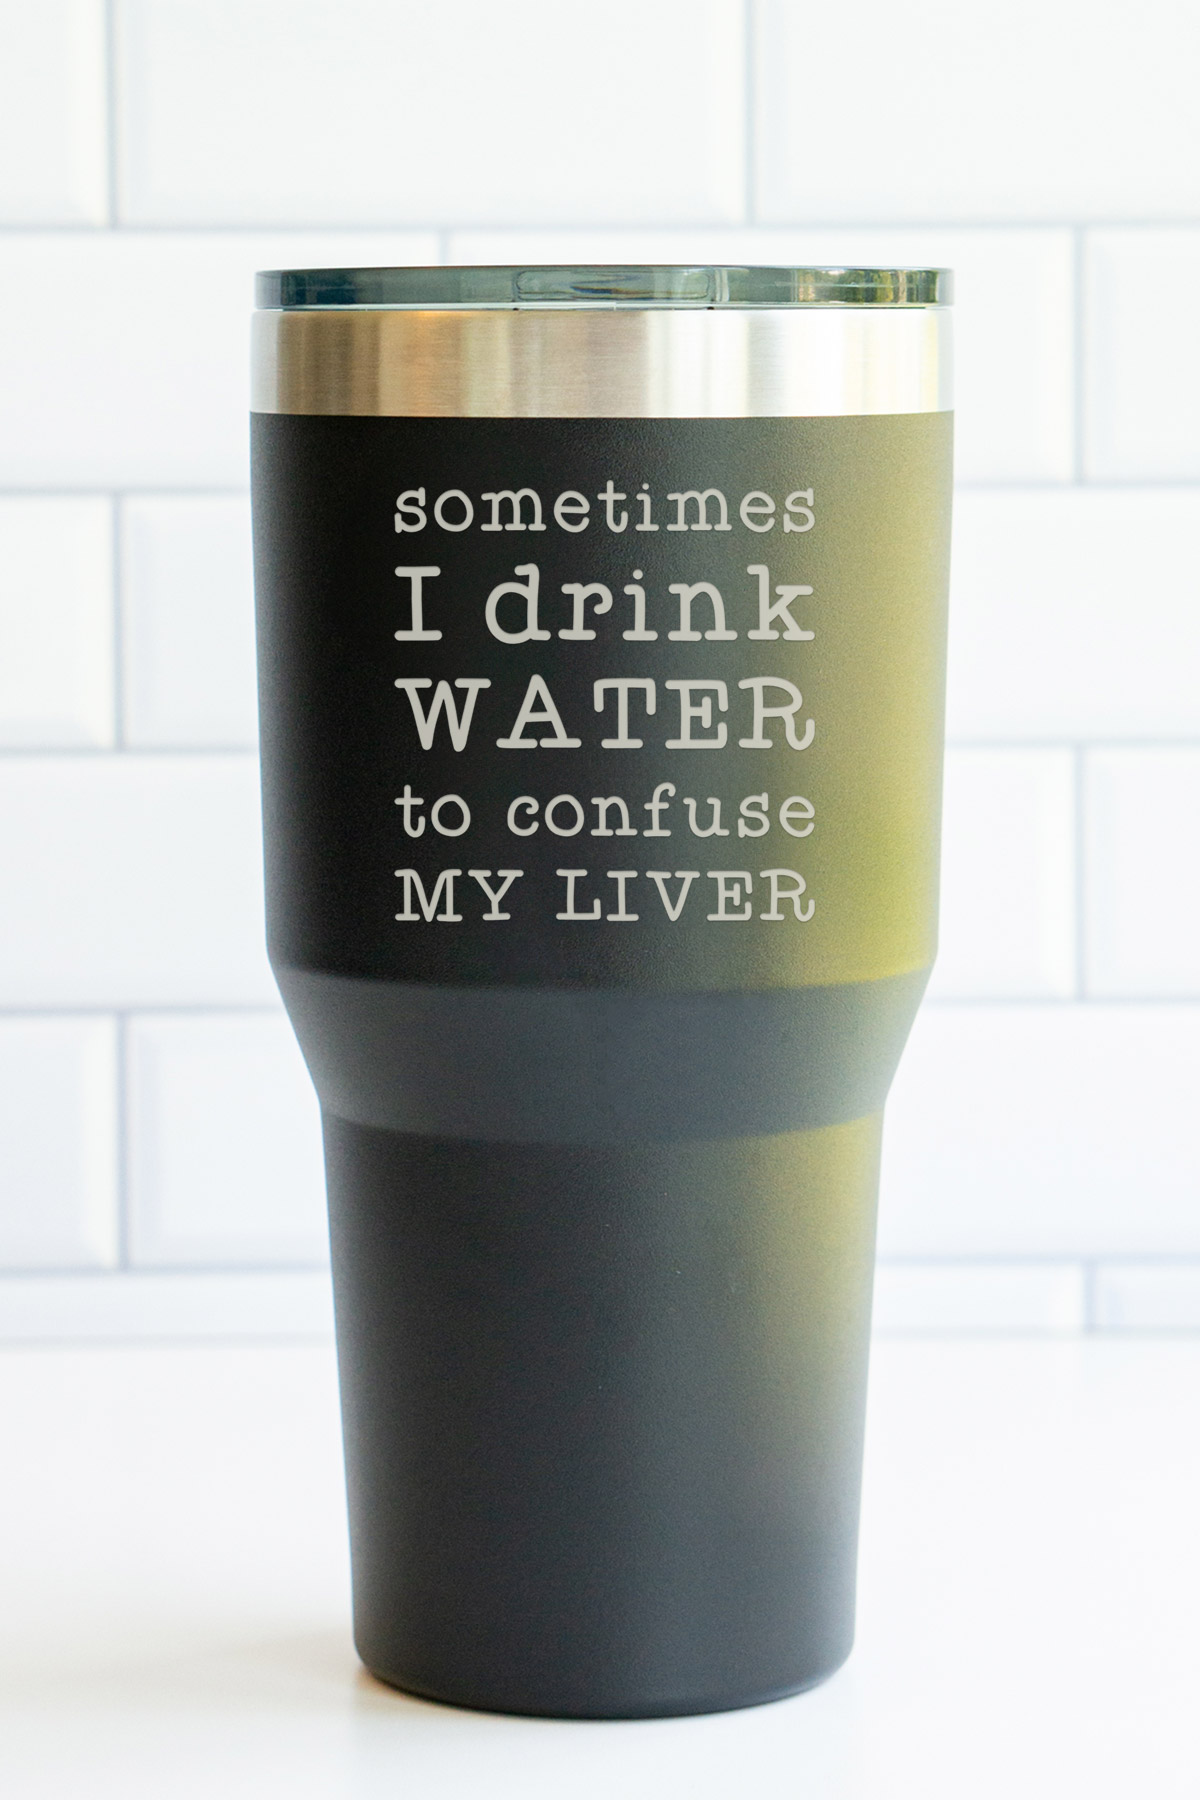 This image is of an engraved tumbler. The tumbler says sometimes I drink water to confuse my liver.